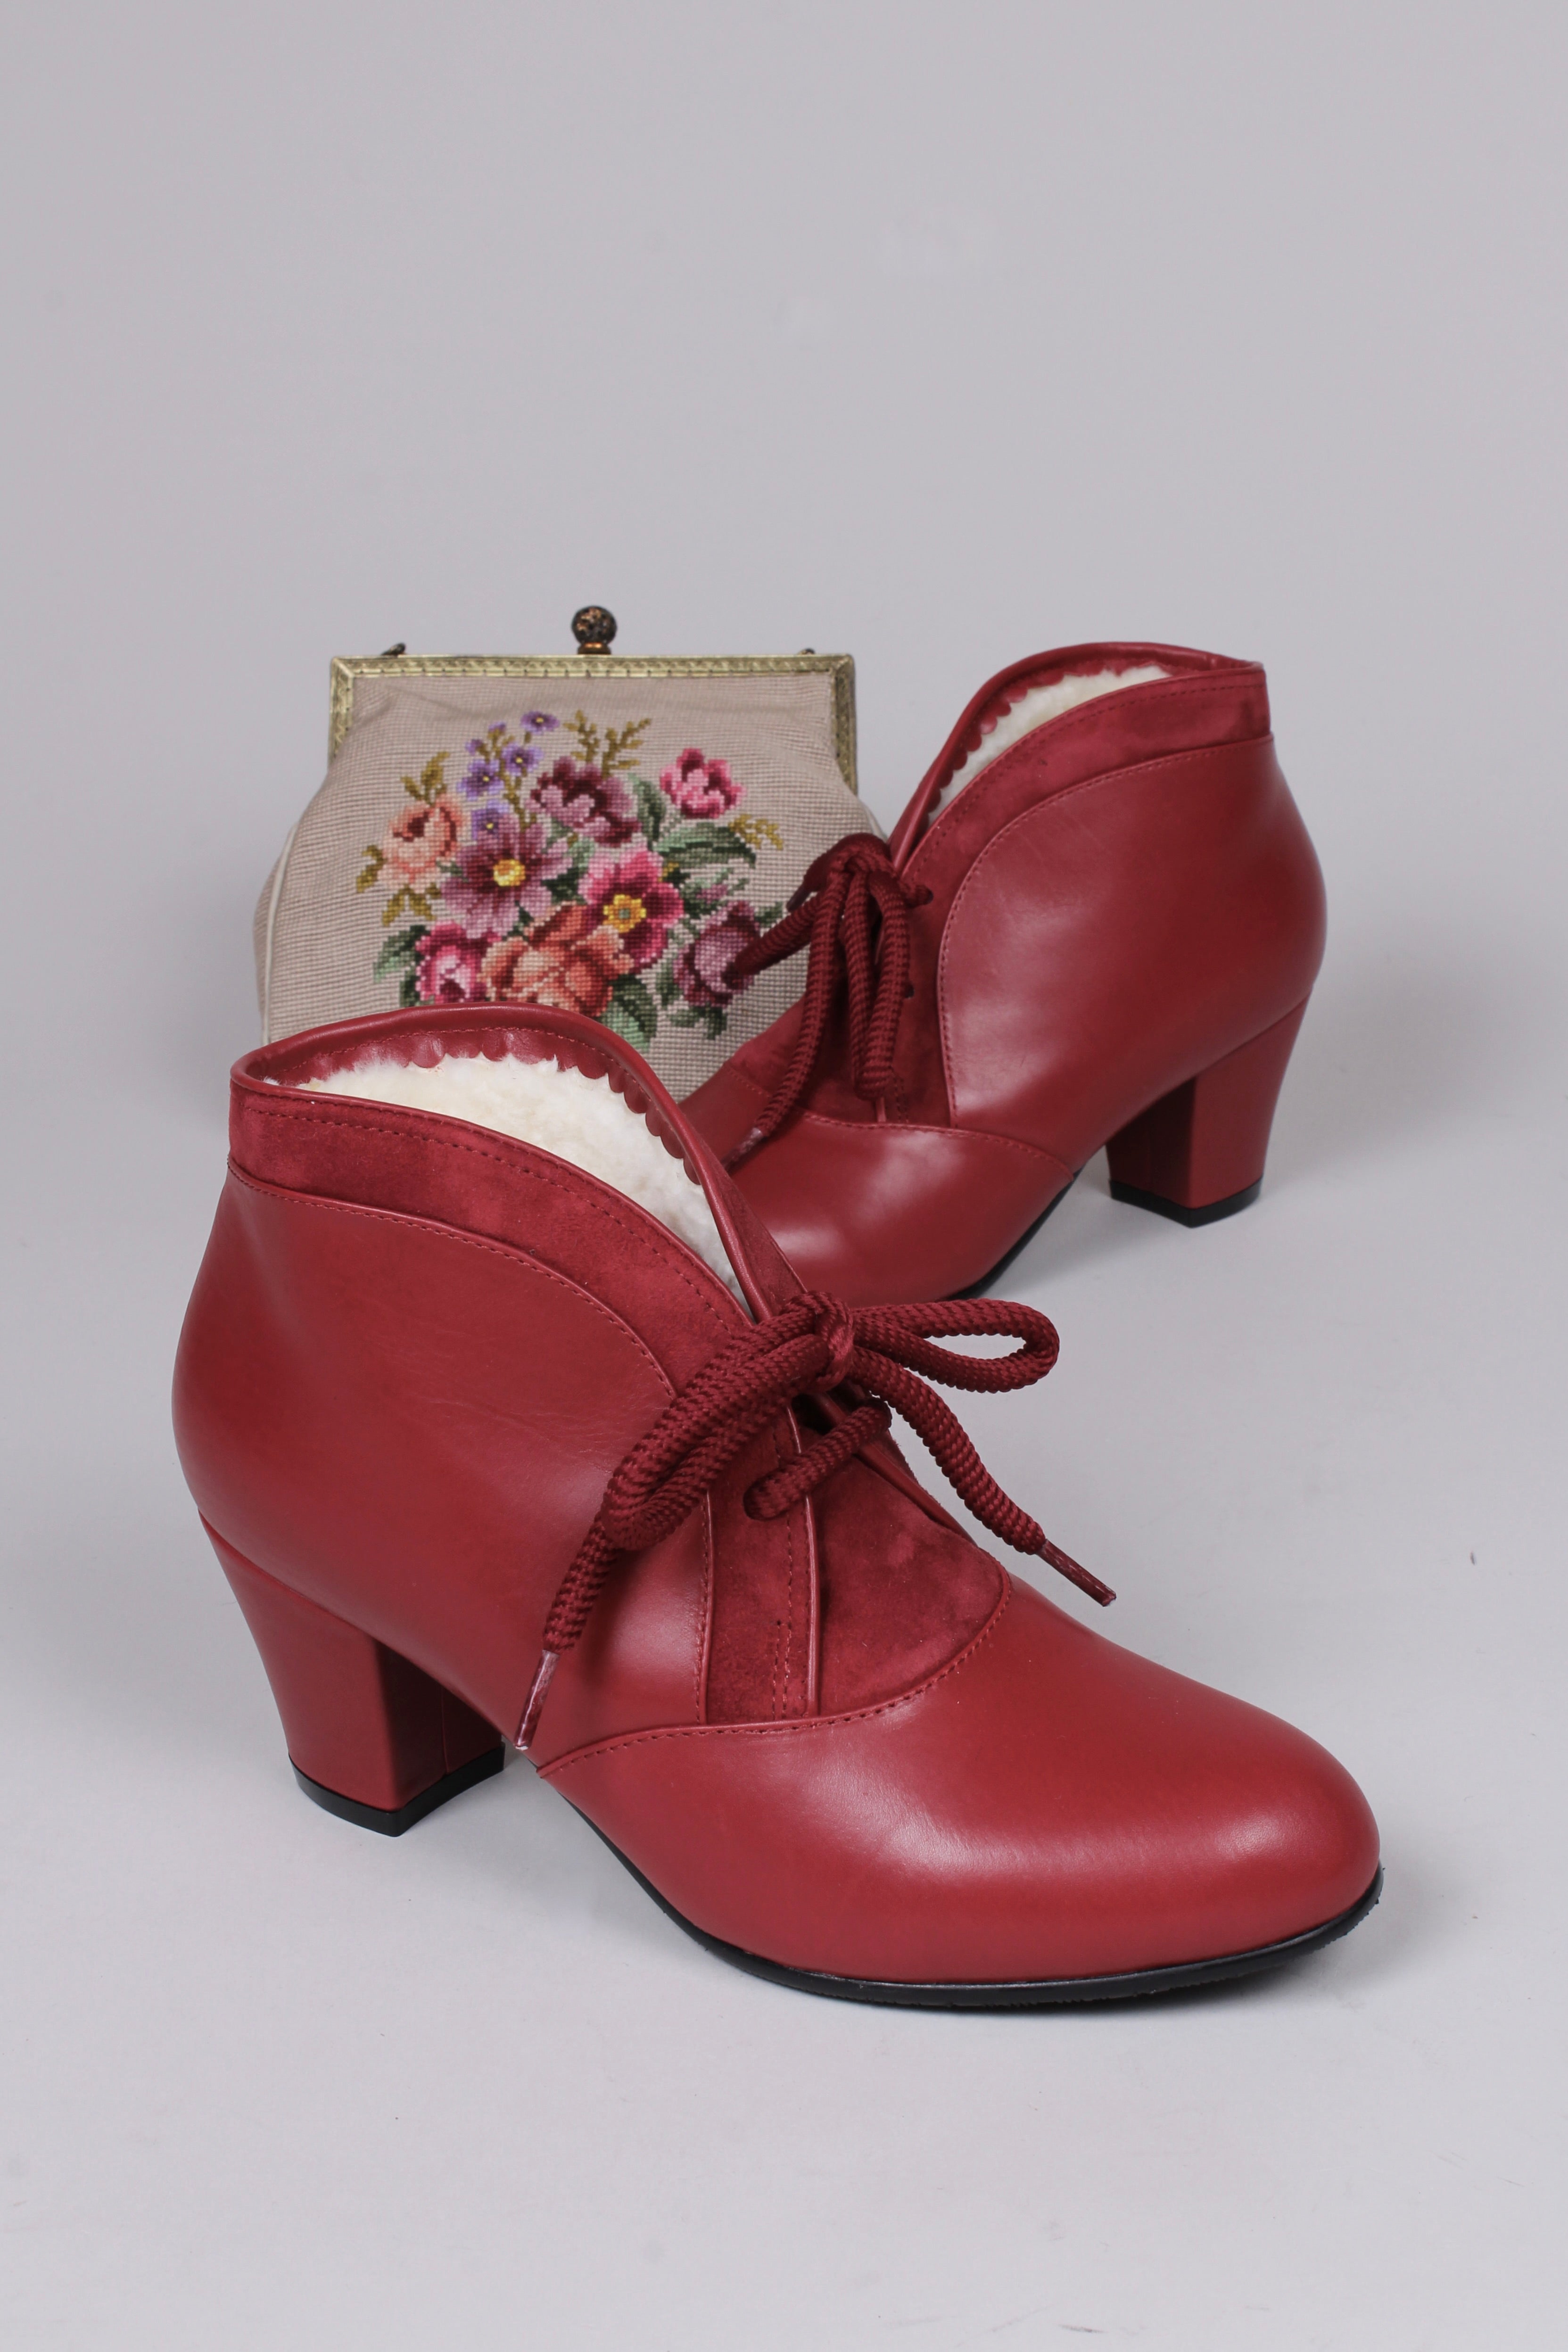 Soft 1940s style winter boot - Red - Lillie